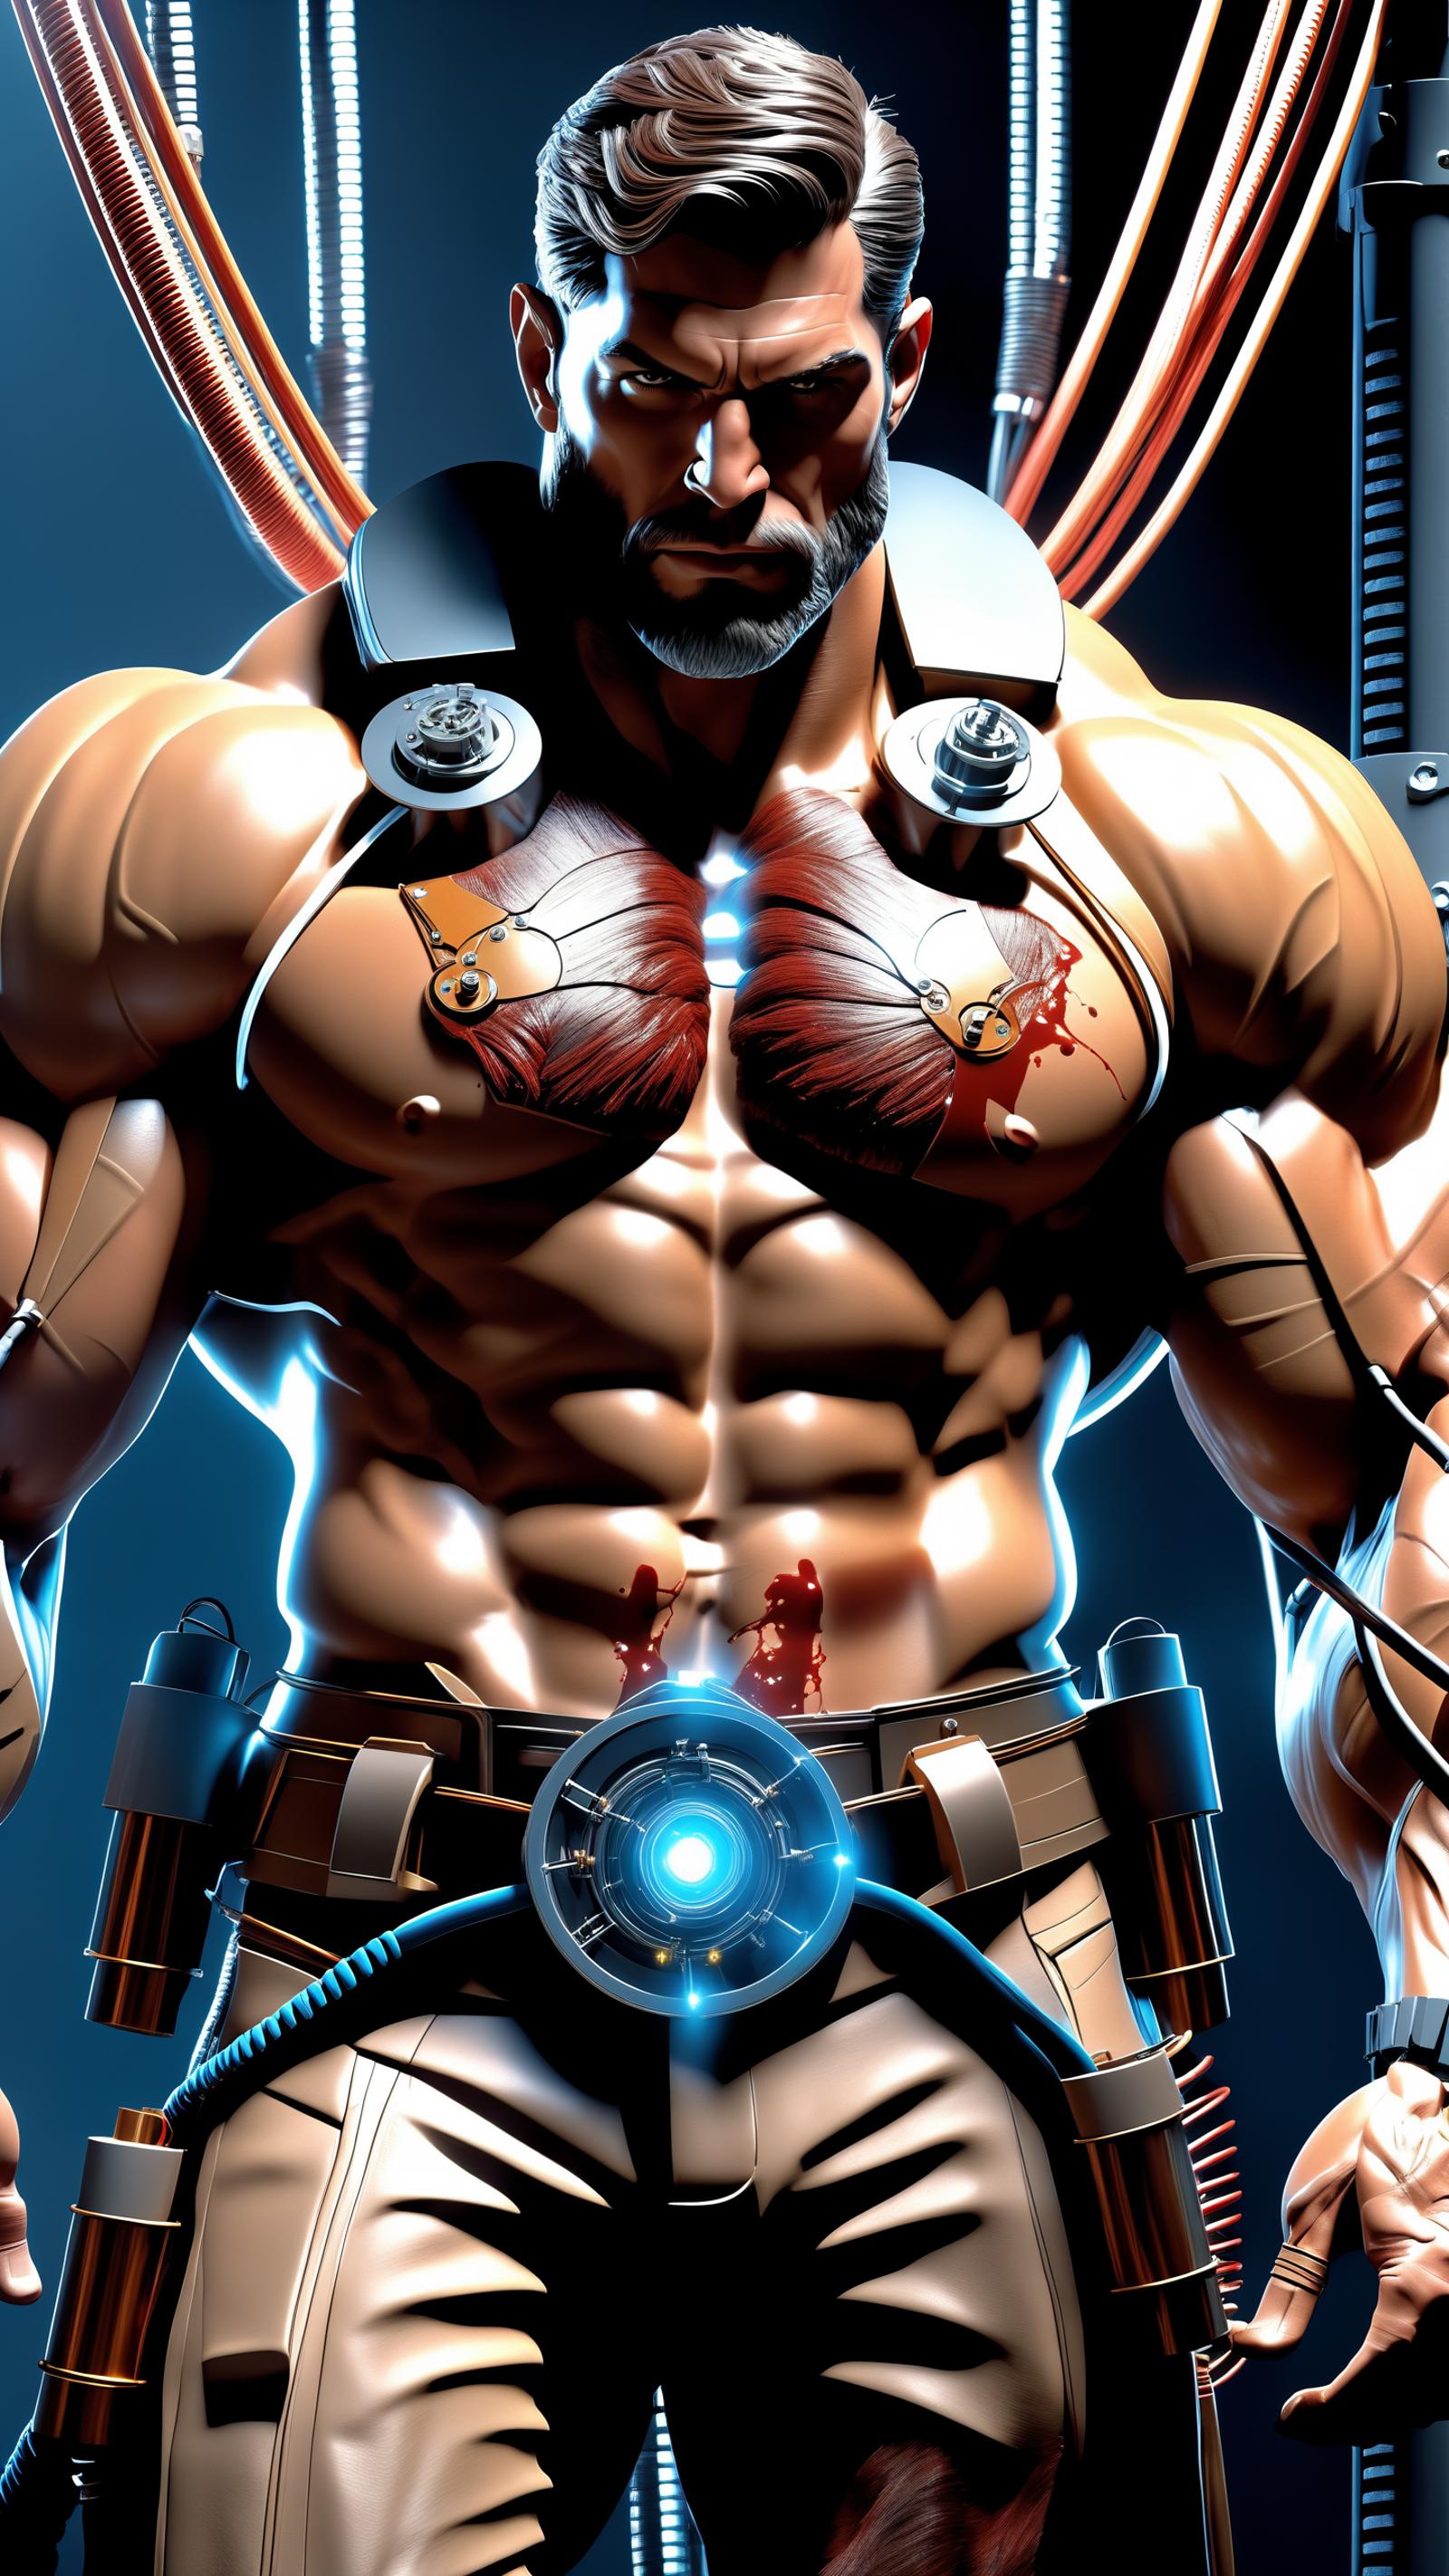 3D rendering of a muscular man with a futuristic design, wearing a gun and a cassette tape player on his chest.